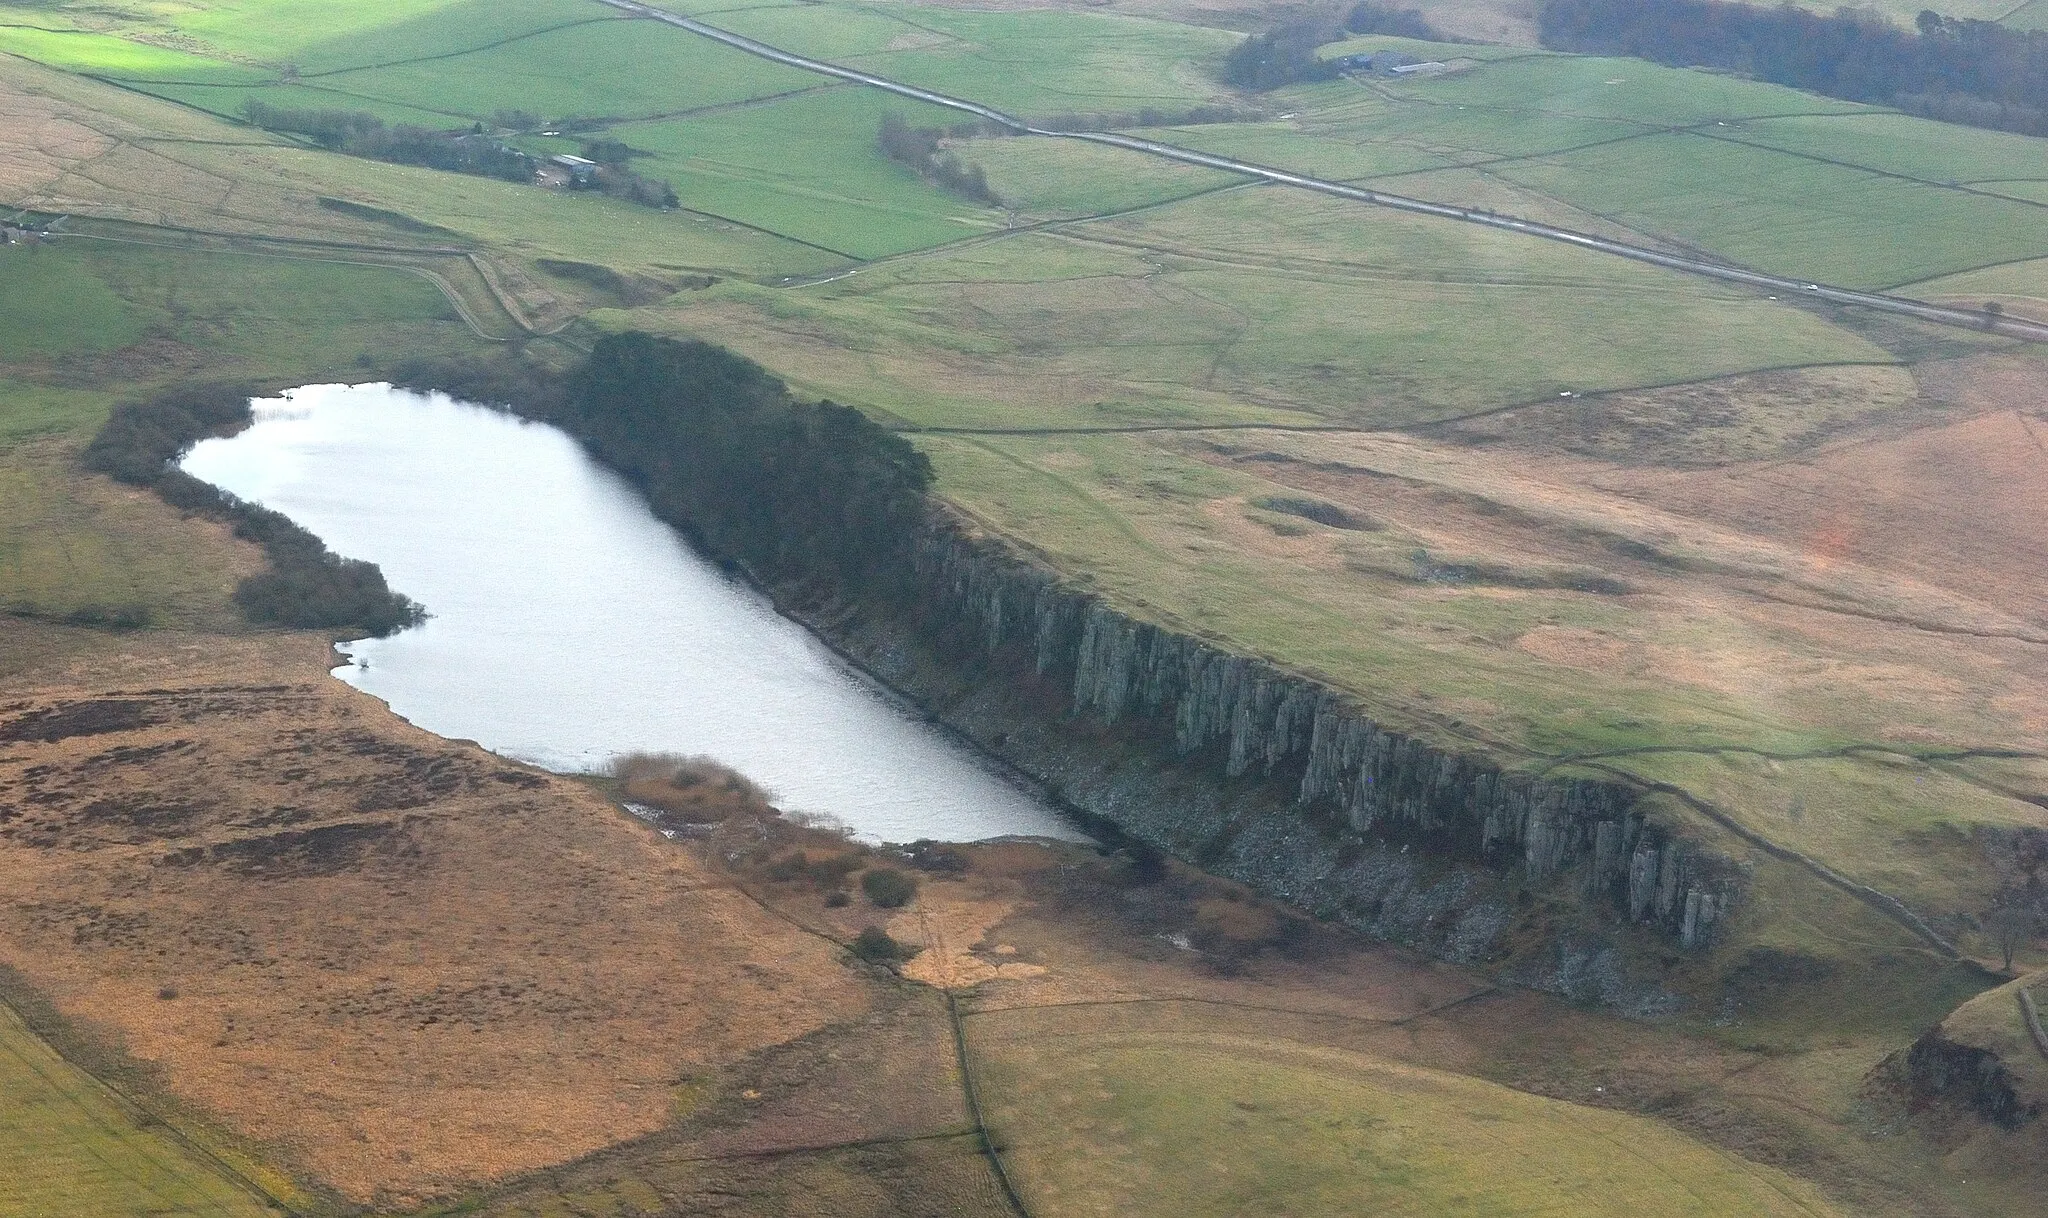 Photo showing: Aerial photograph of Crag Lough, Northumberland, England, with a section of Hadrian's Wall between Milecastle 37 (extreme left) and the Sycamore Gap (lower right, with the leafless Sycamore Gap tree on the edge of the picture). Nikon D60 f=55mm f/10 at 1/400s ISO 800. Processed using Nikon ViewNX 2.1.2 and GIMP 2.6.11.